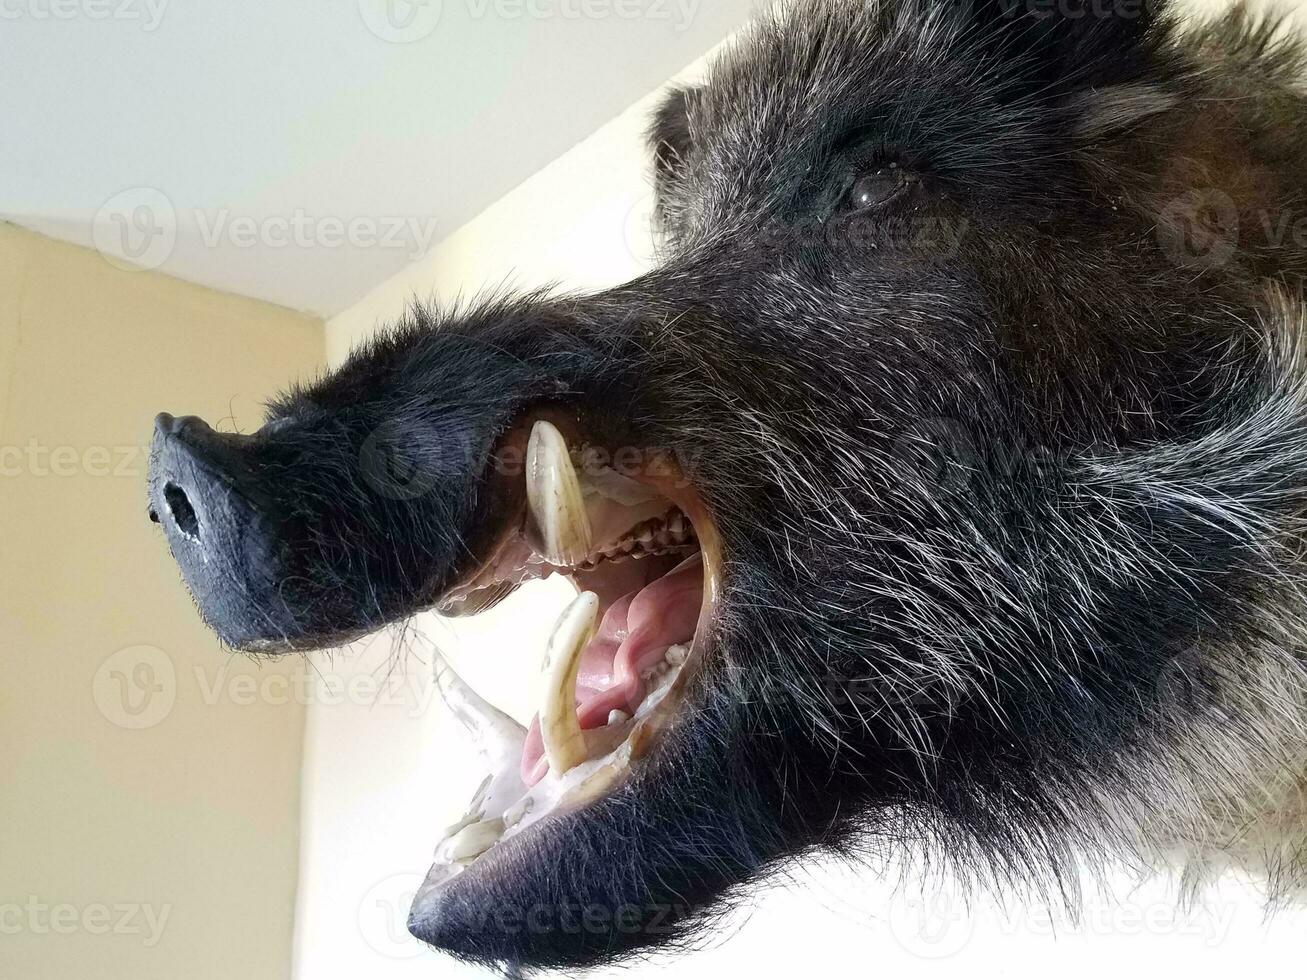 wild boar or pig head mounted on wall photo